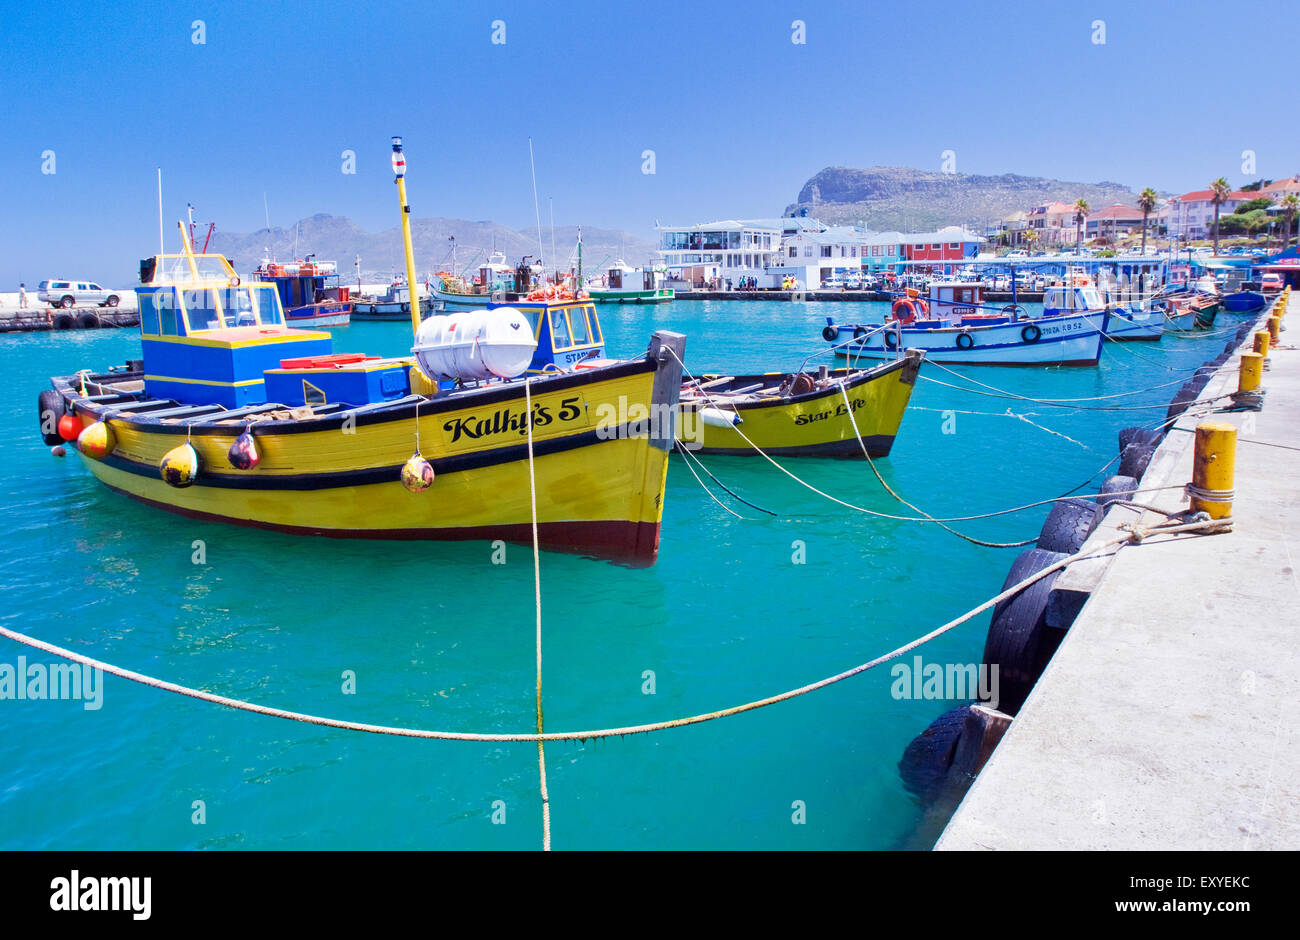 Fishing boats in Kalk Bay harbor under a clear blue sky Stock Photo